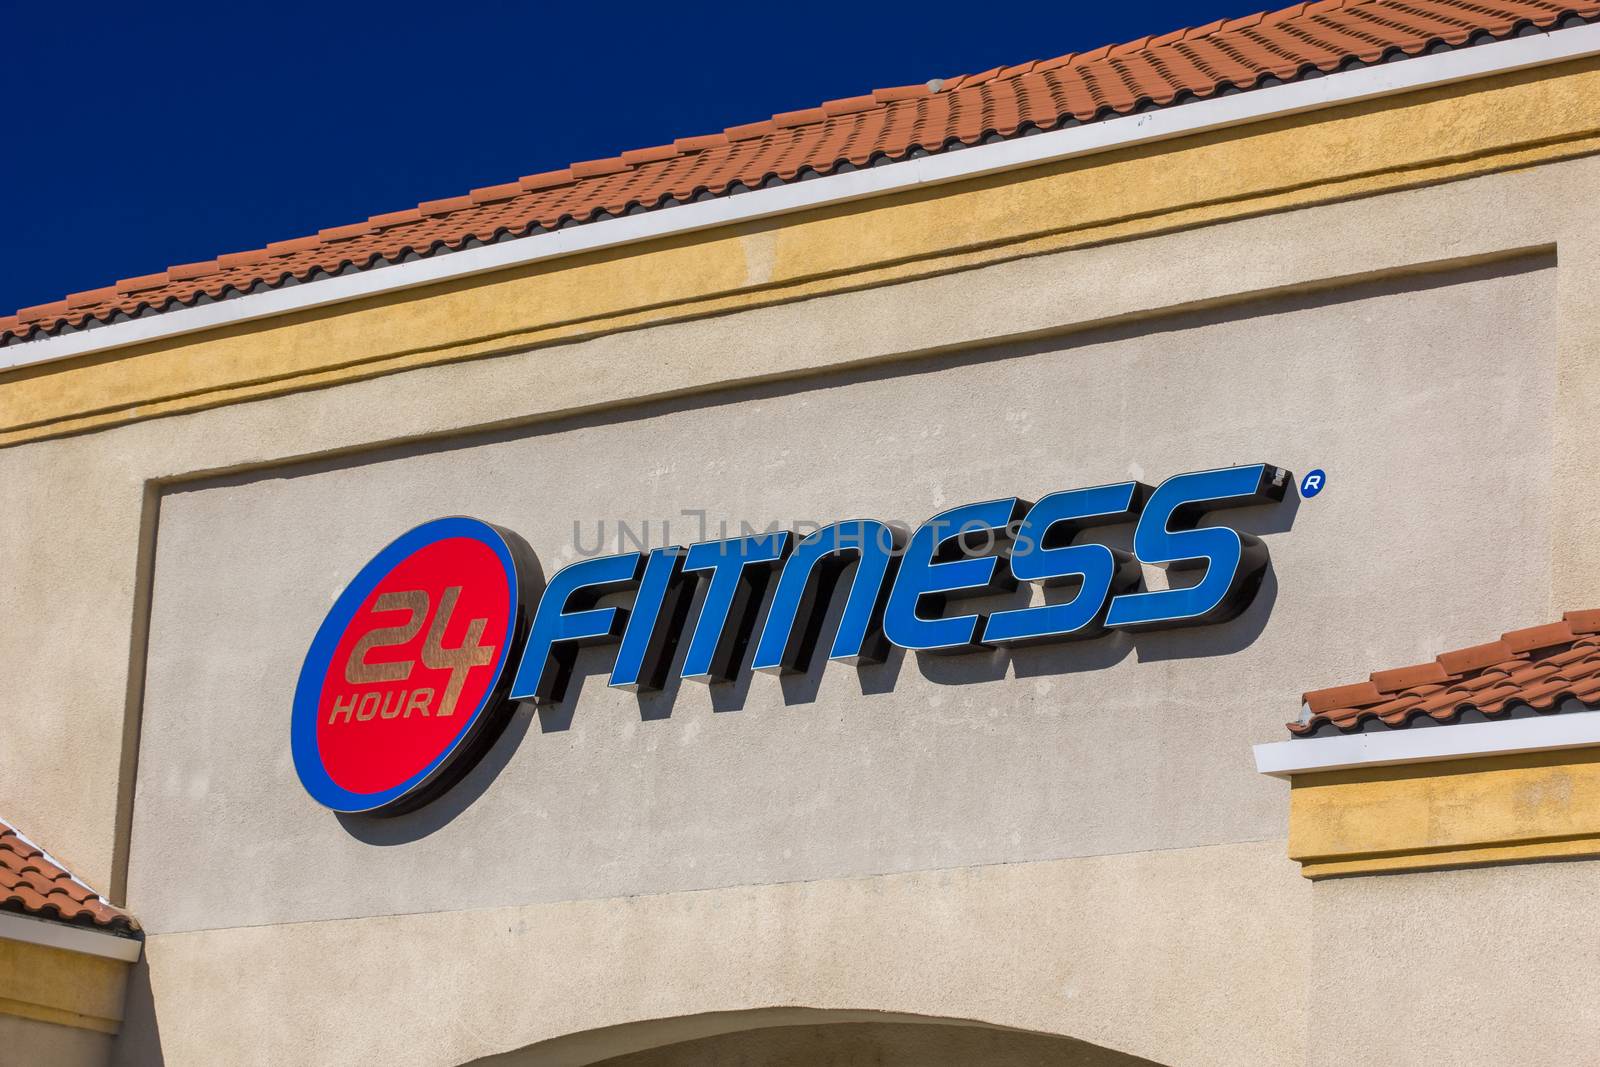 24 Hour Fitness Building by wolterk